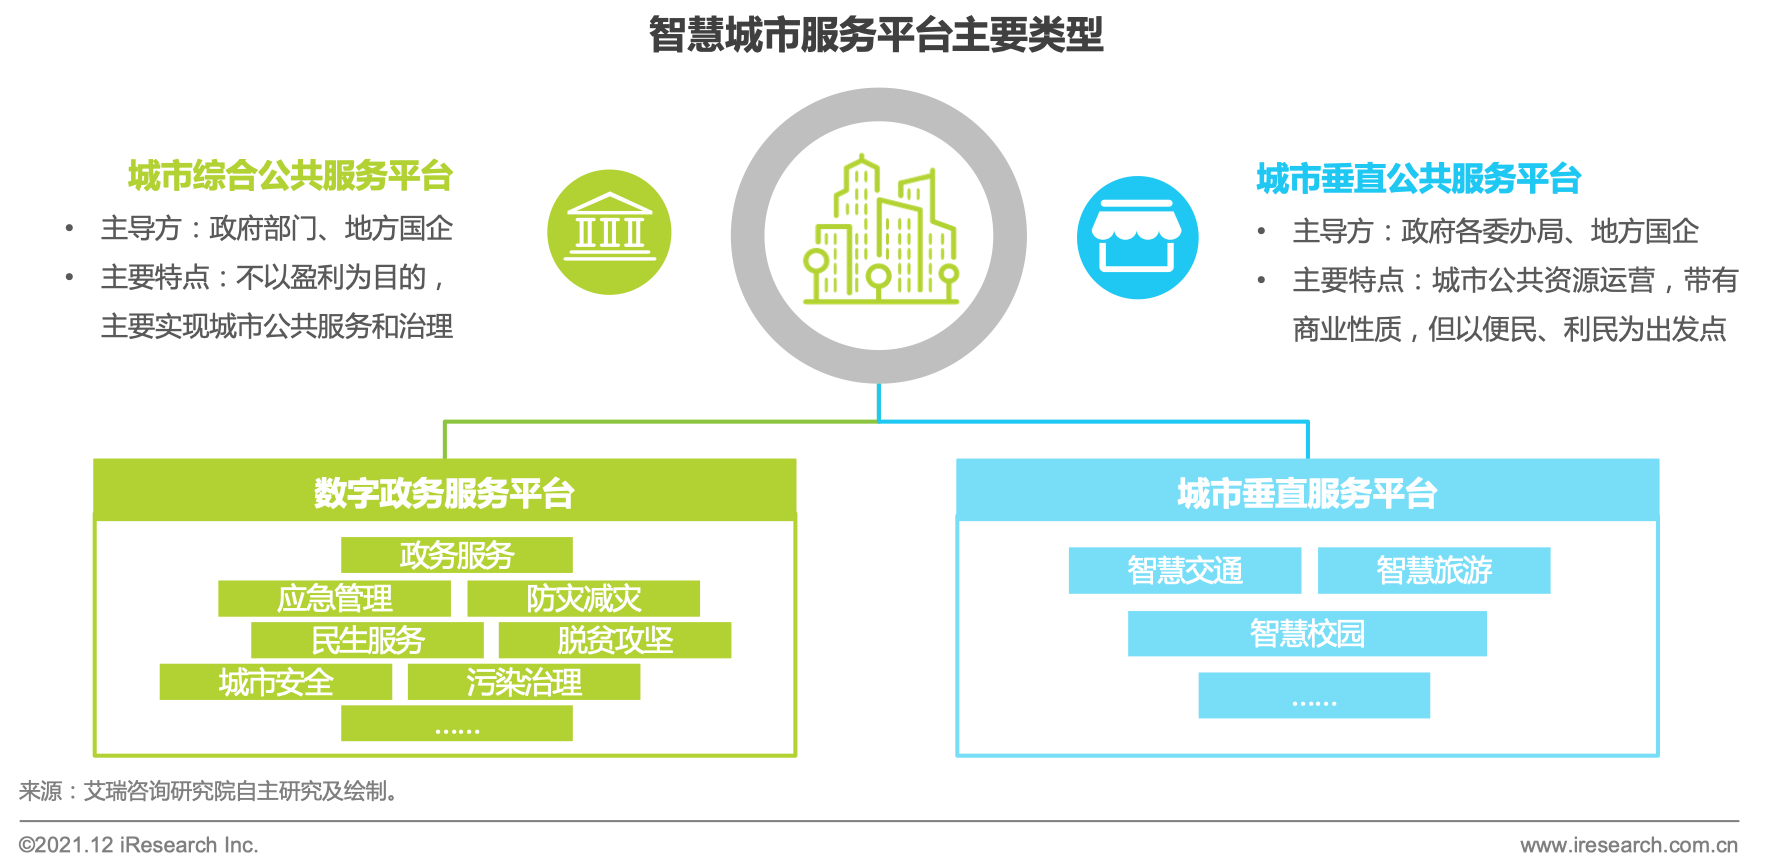 Haihai iResearch: further iteration of the urban service platform, and greater value in urban management